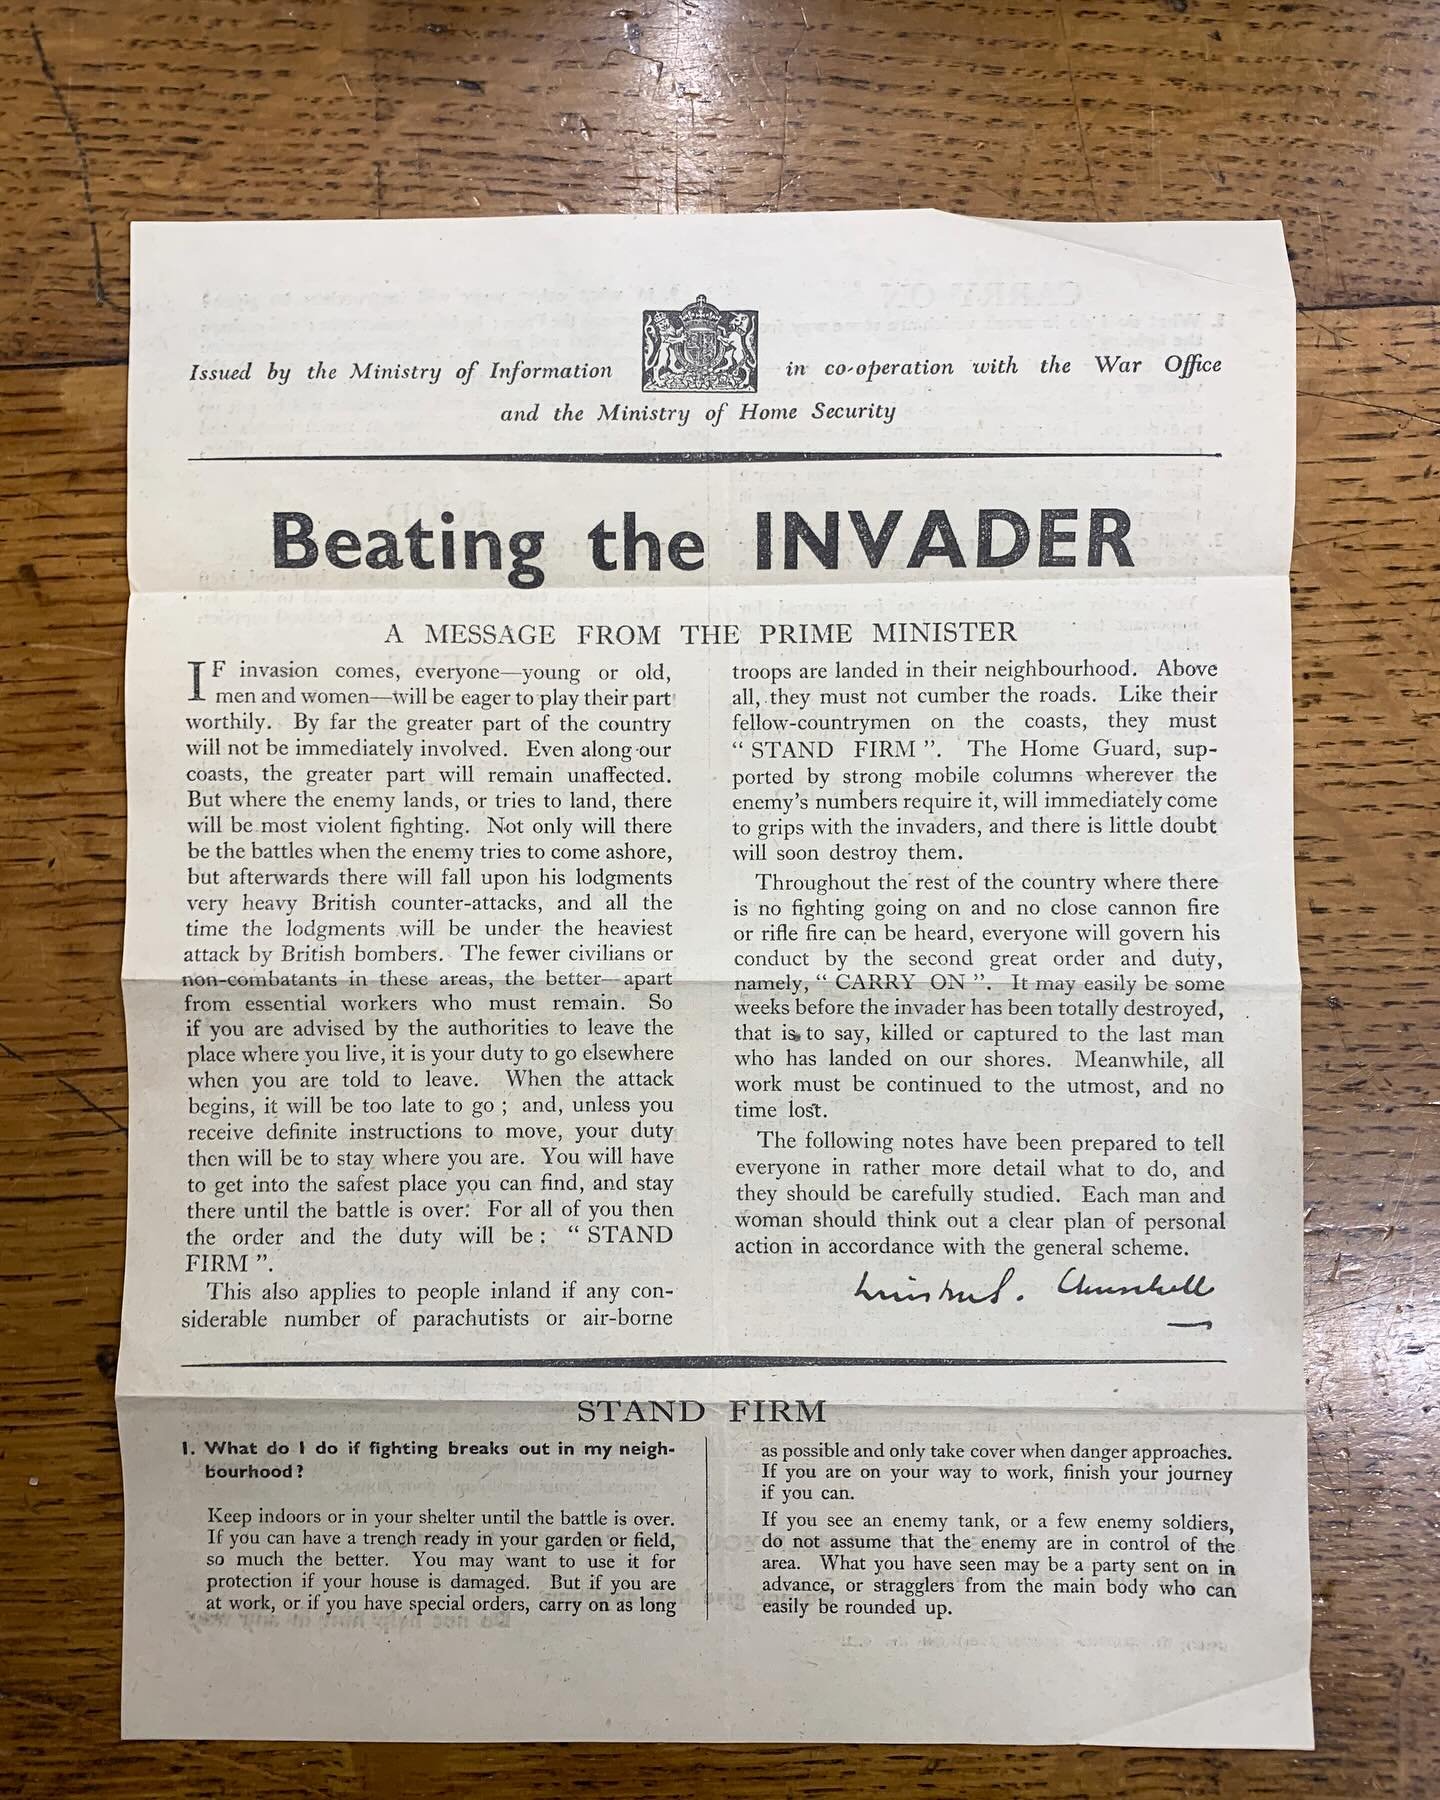 Stand Firm! 1941 instruction leaflet giving instructions on what to do in the event of an invasion. Includes an introduction written by Churchill. Incredibly scarce important document. In excellent condition.
#ww2
#churchill 
#history
#battleofbritai